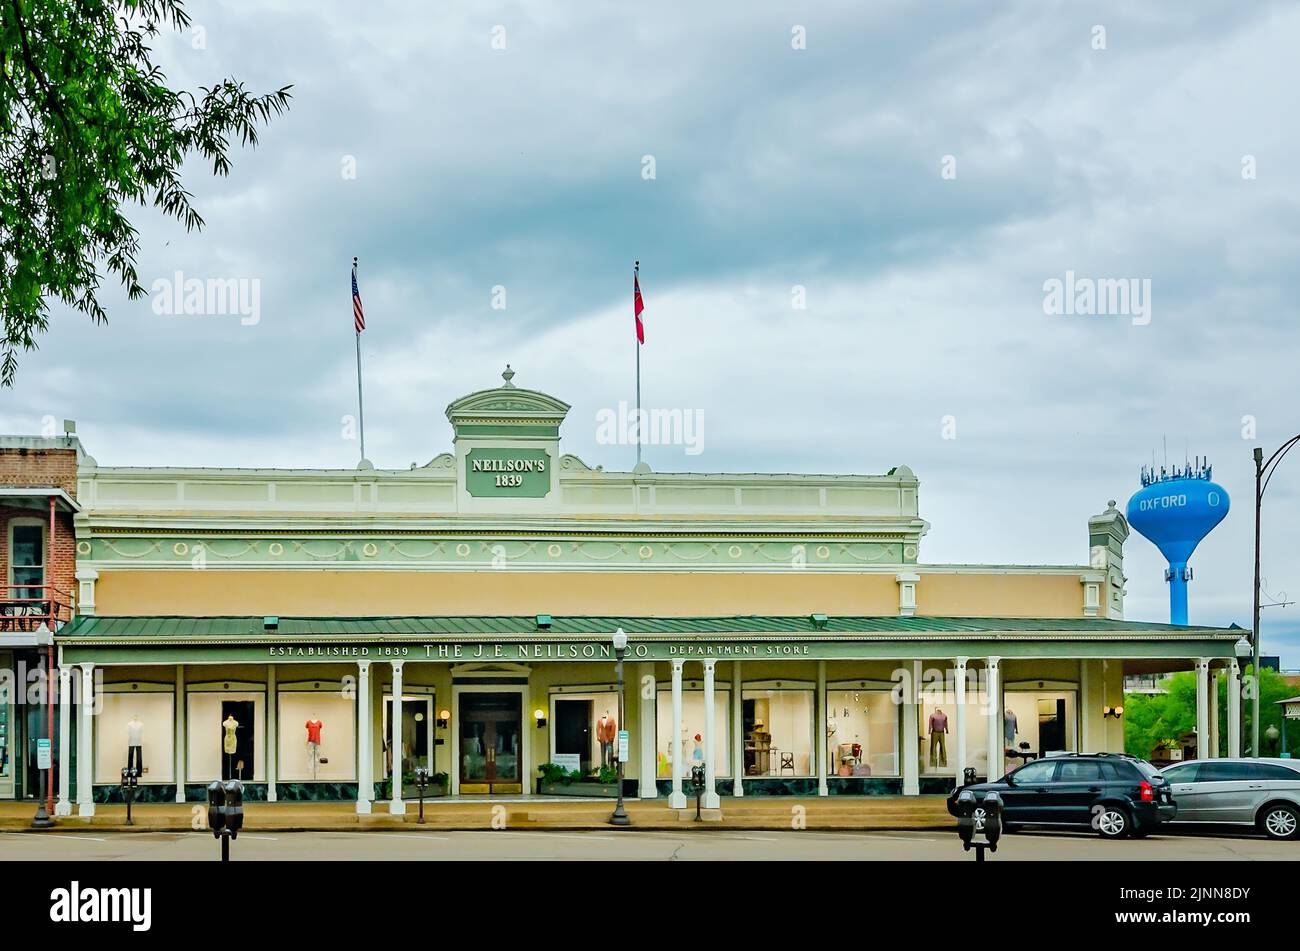 Neilson’s Department Store is pictured in Courthouse Square, May 31, 2015, in Oxford, Mississippi. The J.E. Neilson Department Store was built in 1839. Stock Photo